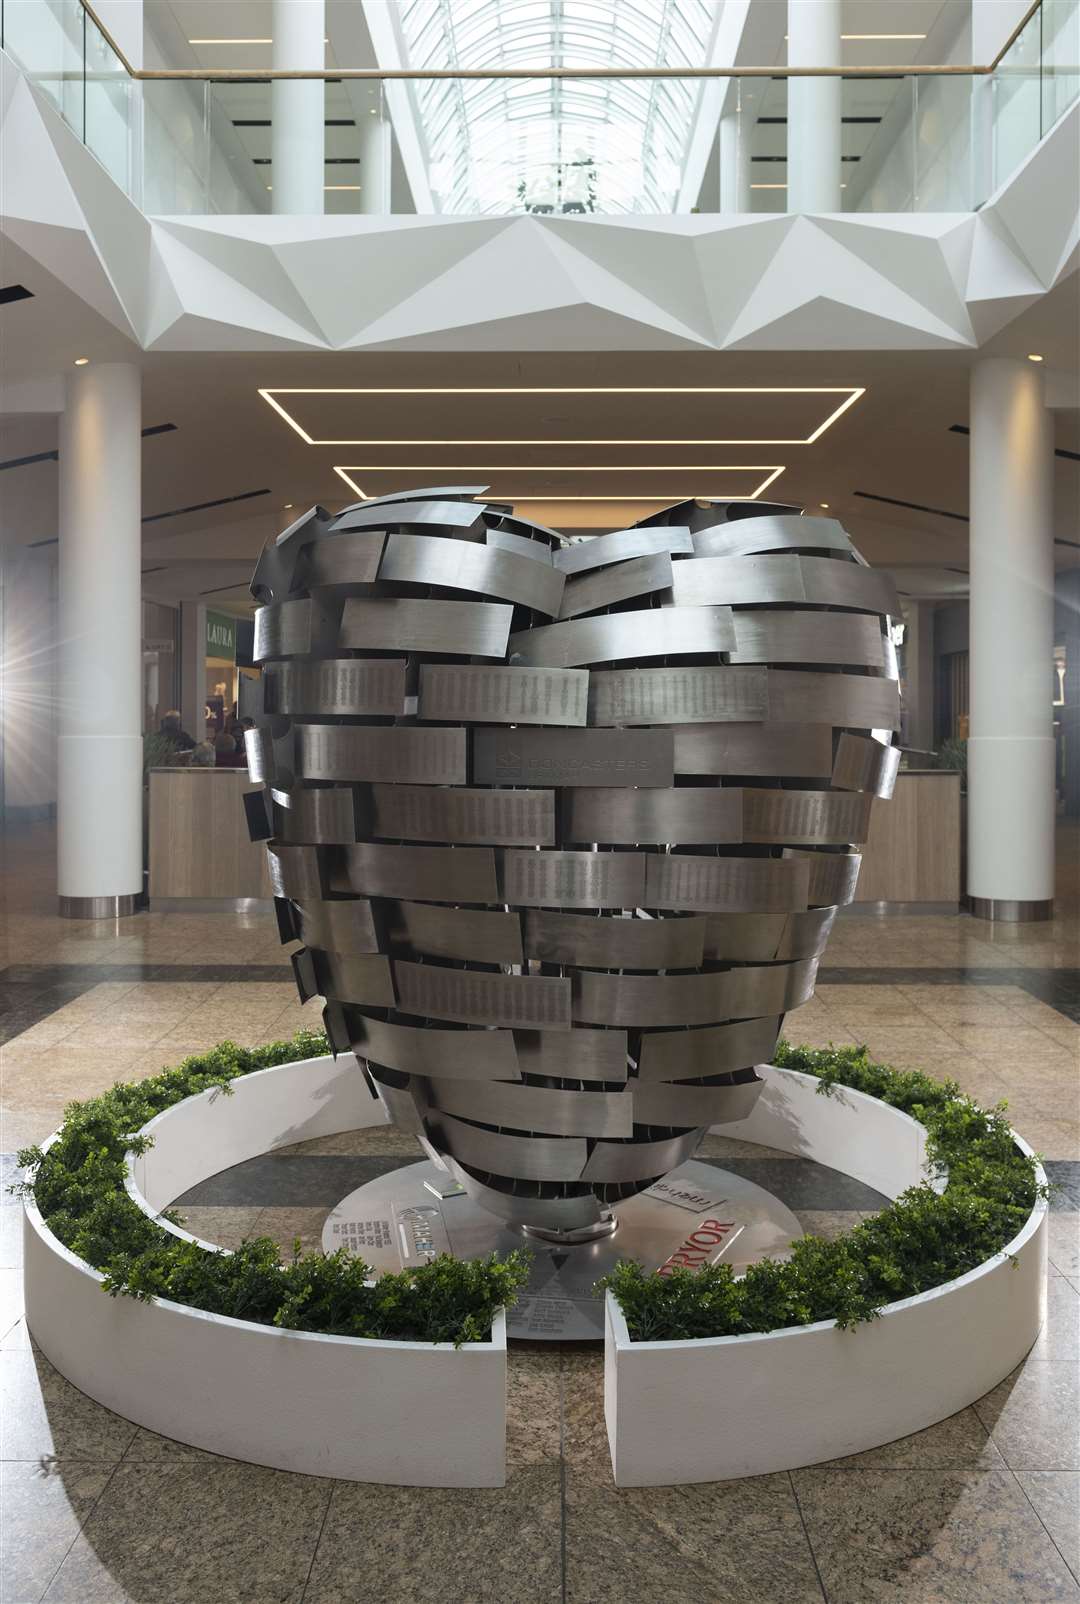 The British Heart Foundation's Heart of Steel sculpture in Sheffield has space for 150,000 names to be engraved on it